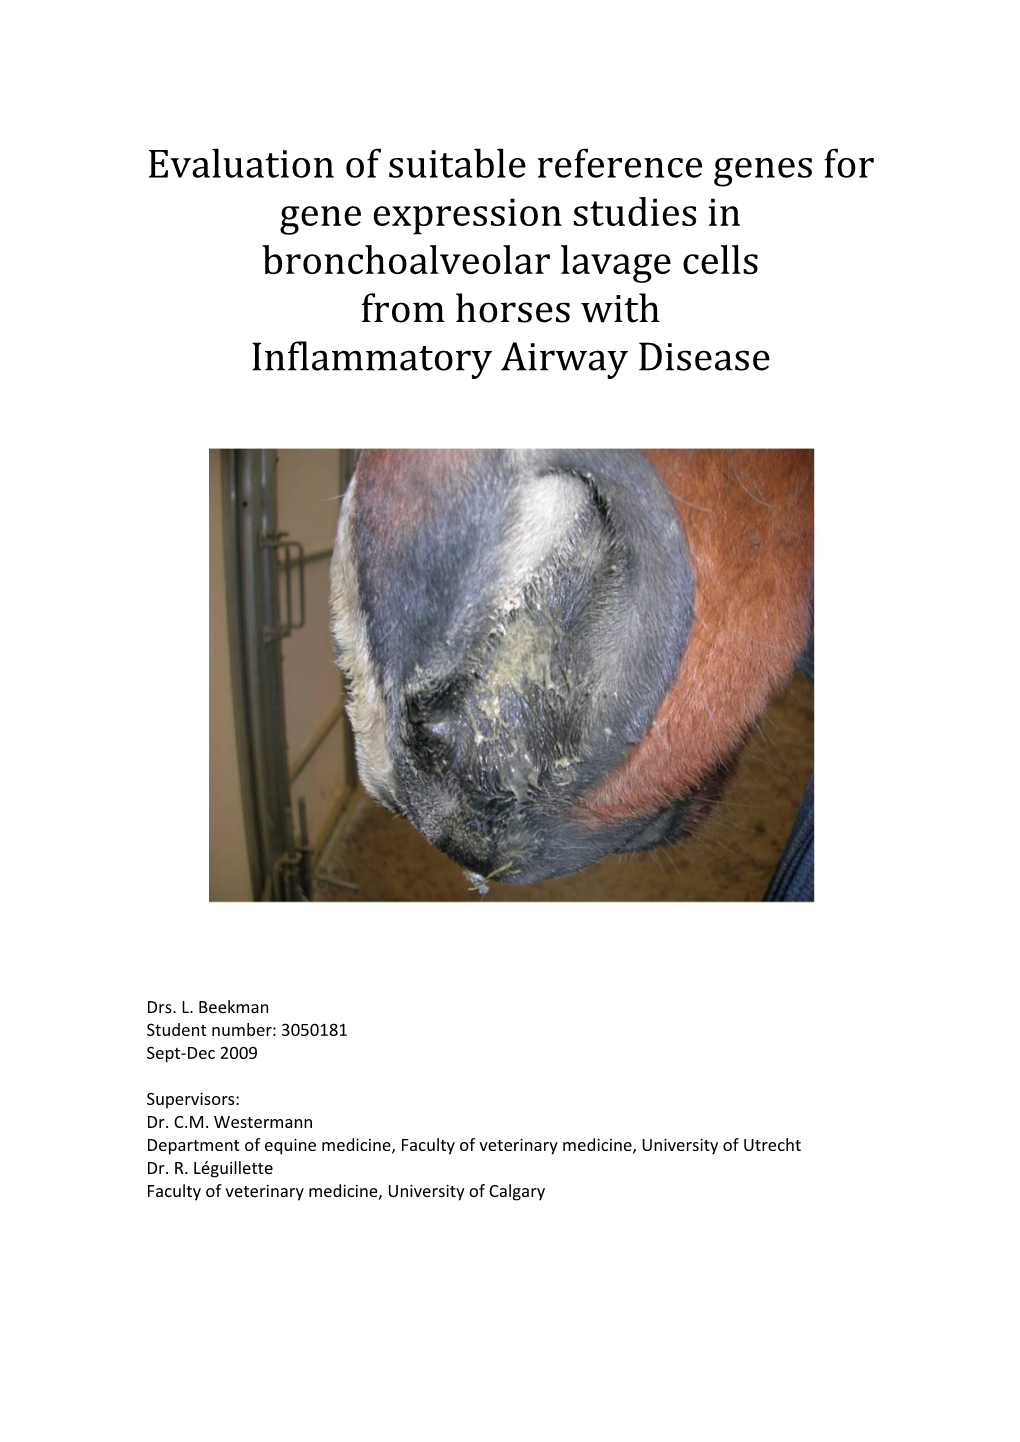 Evaluation of Suitable Reference Genes for Gene Expression Studies in Bronchoalveolar Lavage Cells from Horses with Inflammatory Airway Disease